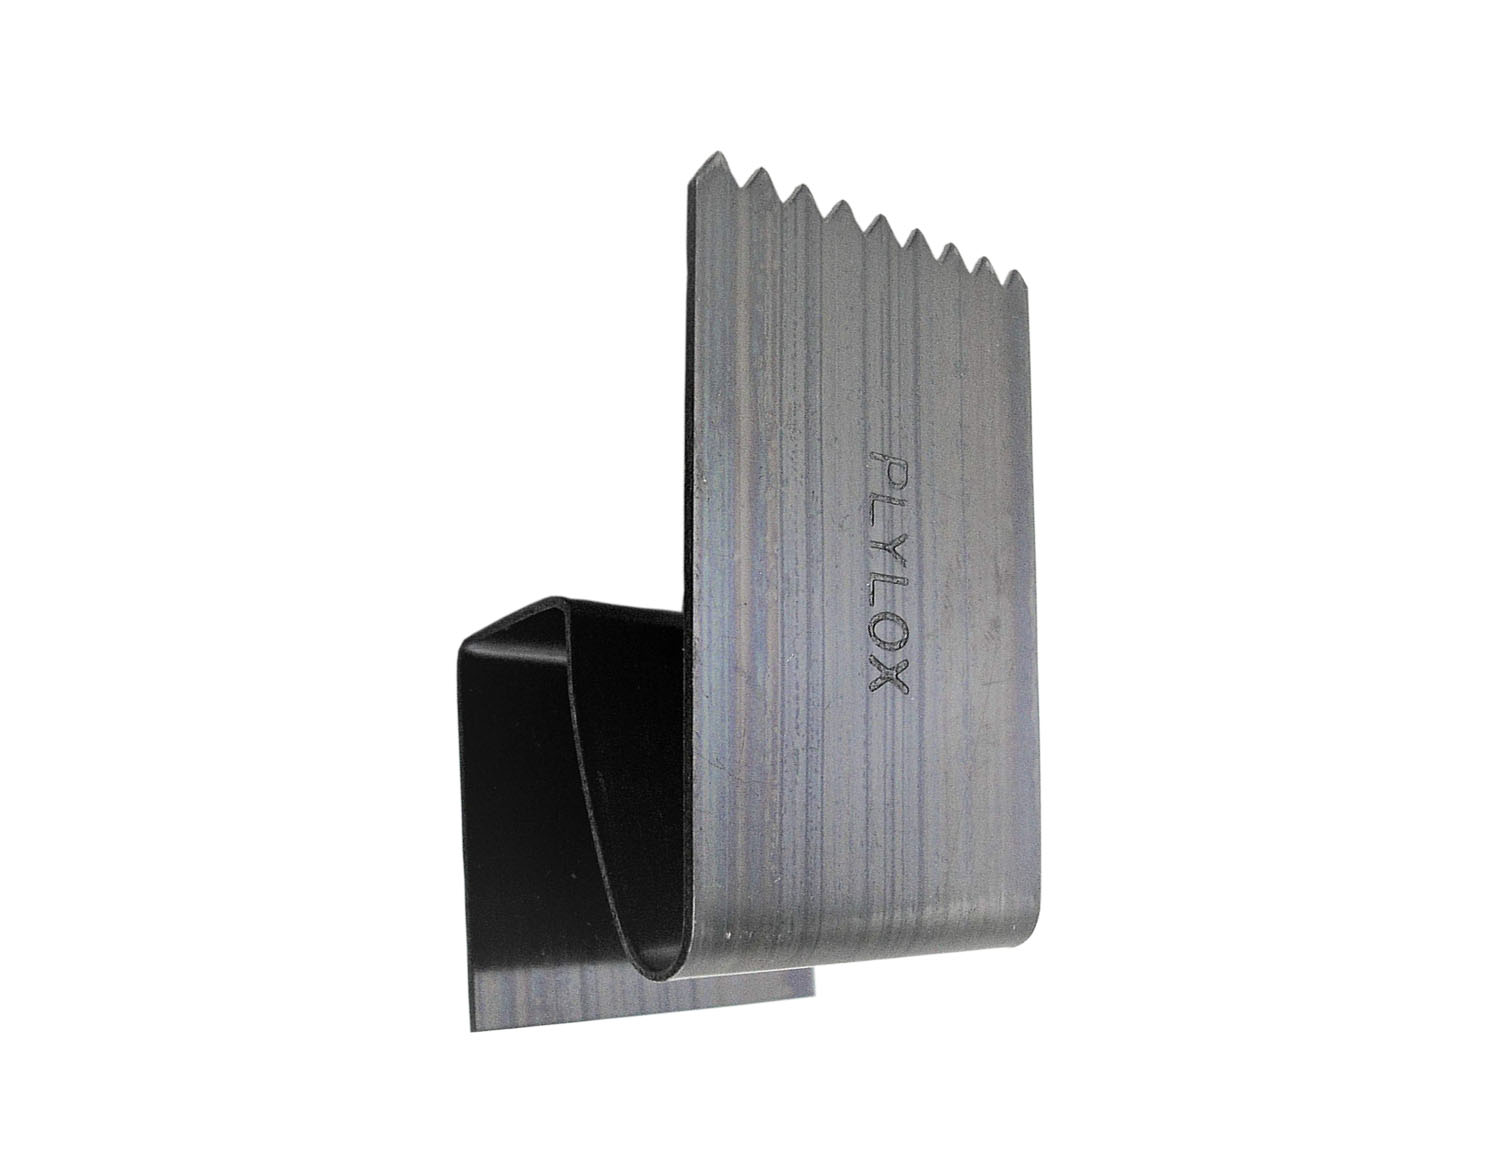 80 PLYLOX 1/2" Plywood Hurricane Window Clips 4 Packs x 20 Clips In Each Package 